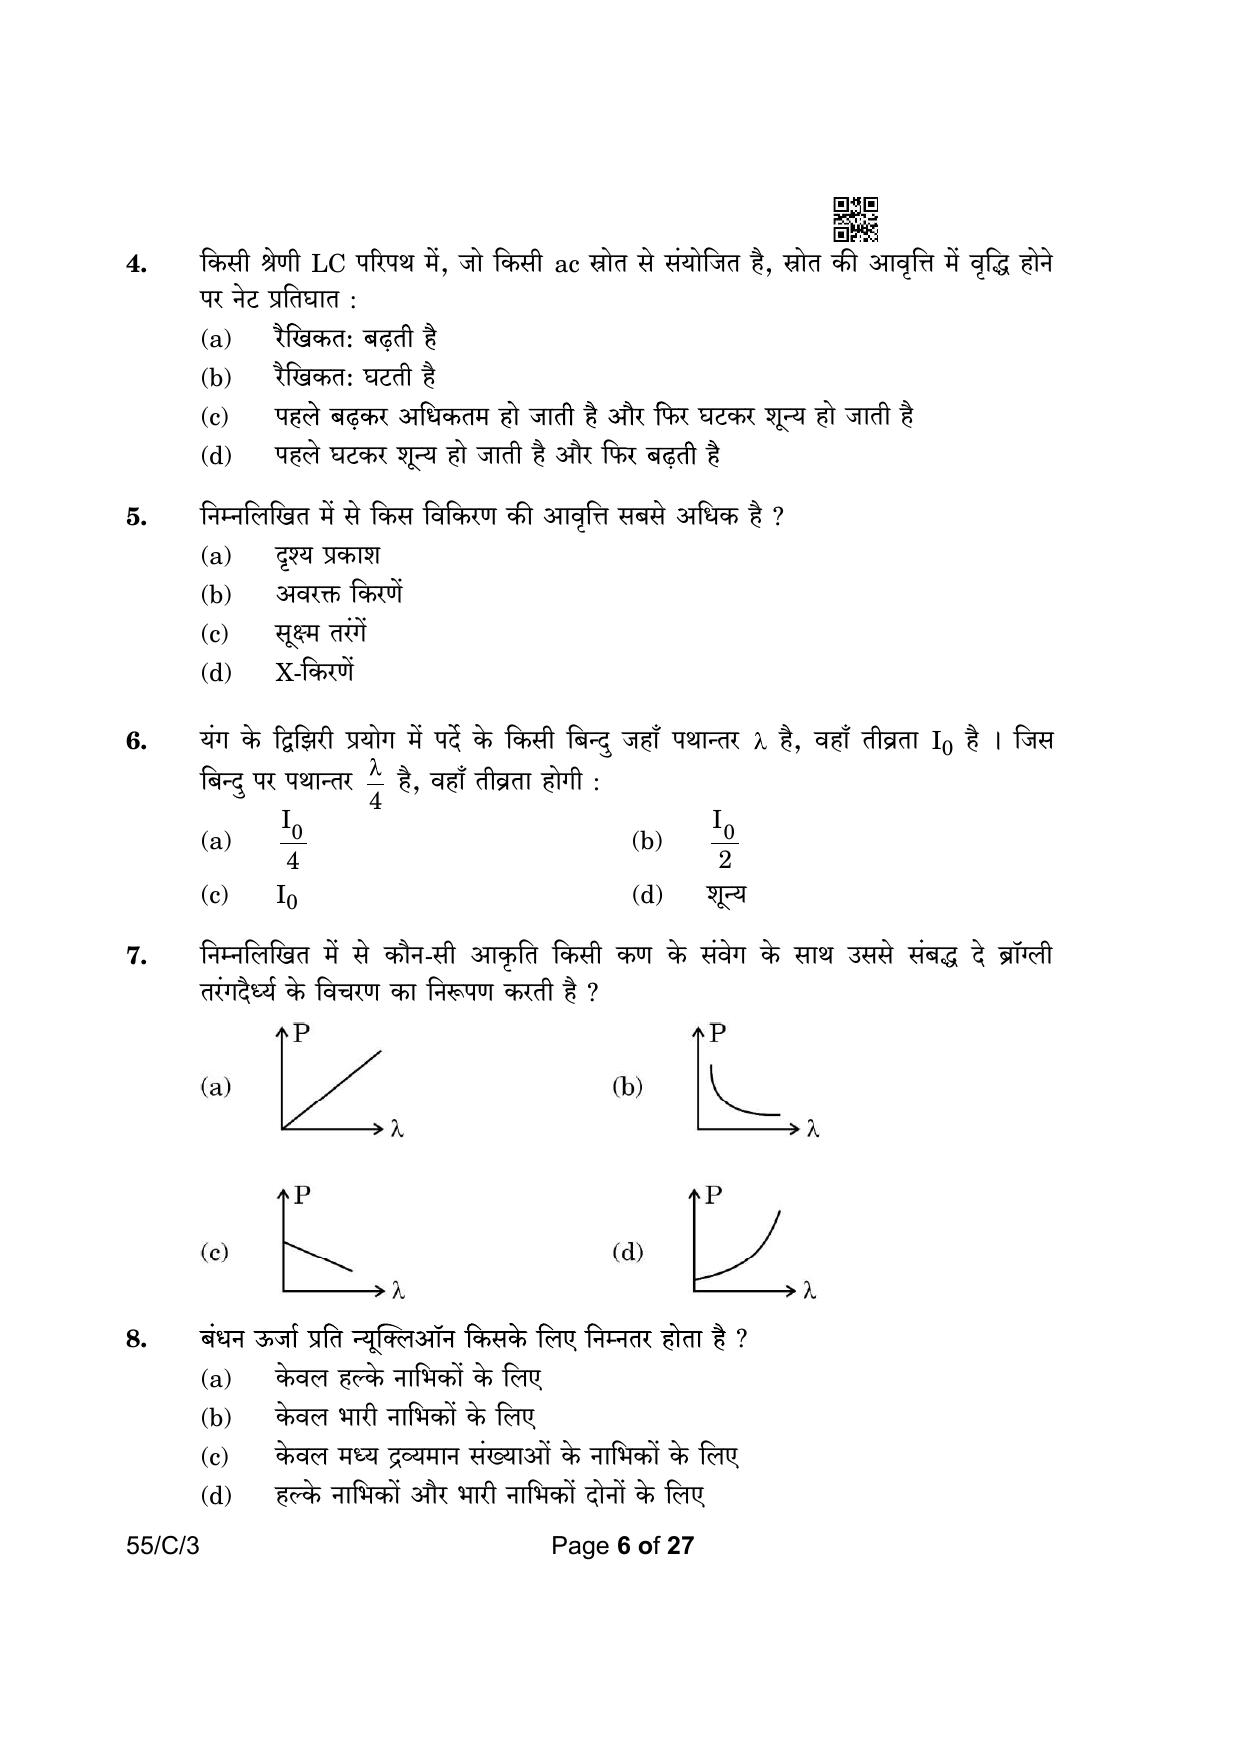 CBSE Class 12 55-3 Physics 2023 (Compartment) Question Paper - Page 6